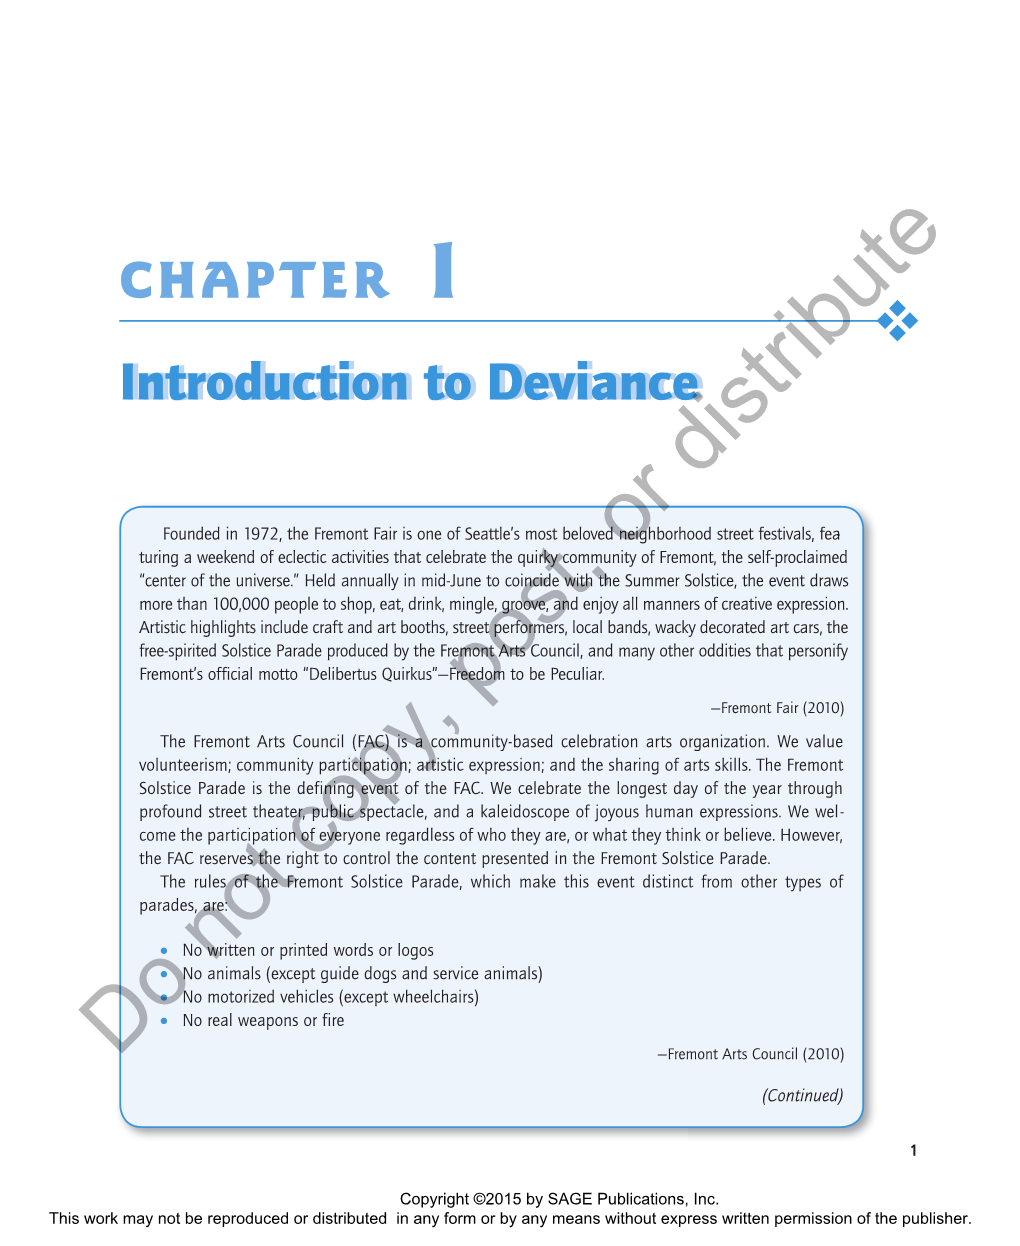 CHAPTER 1 Introduction to Deviance